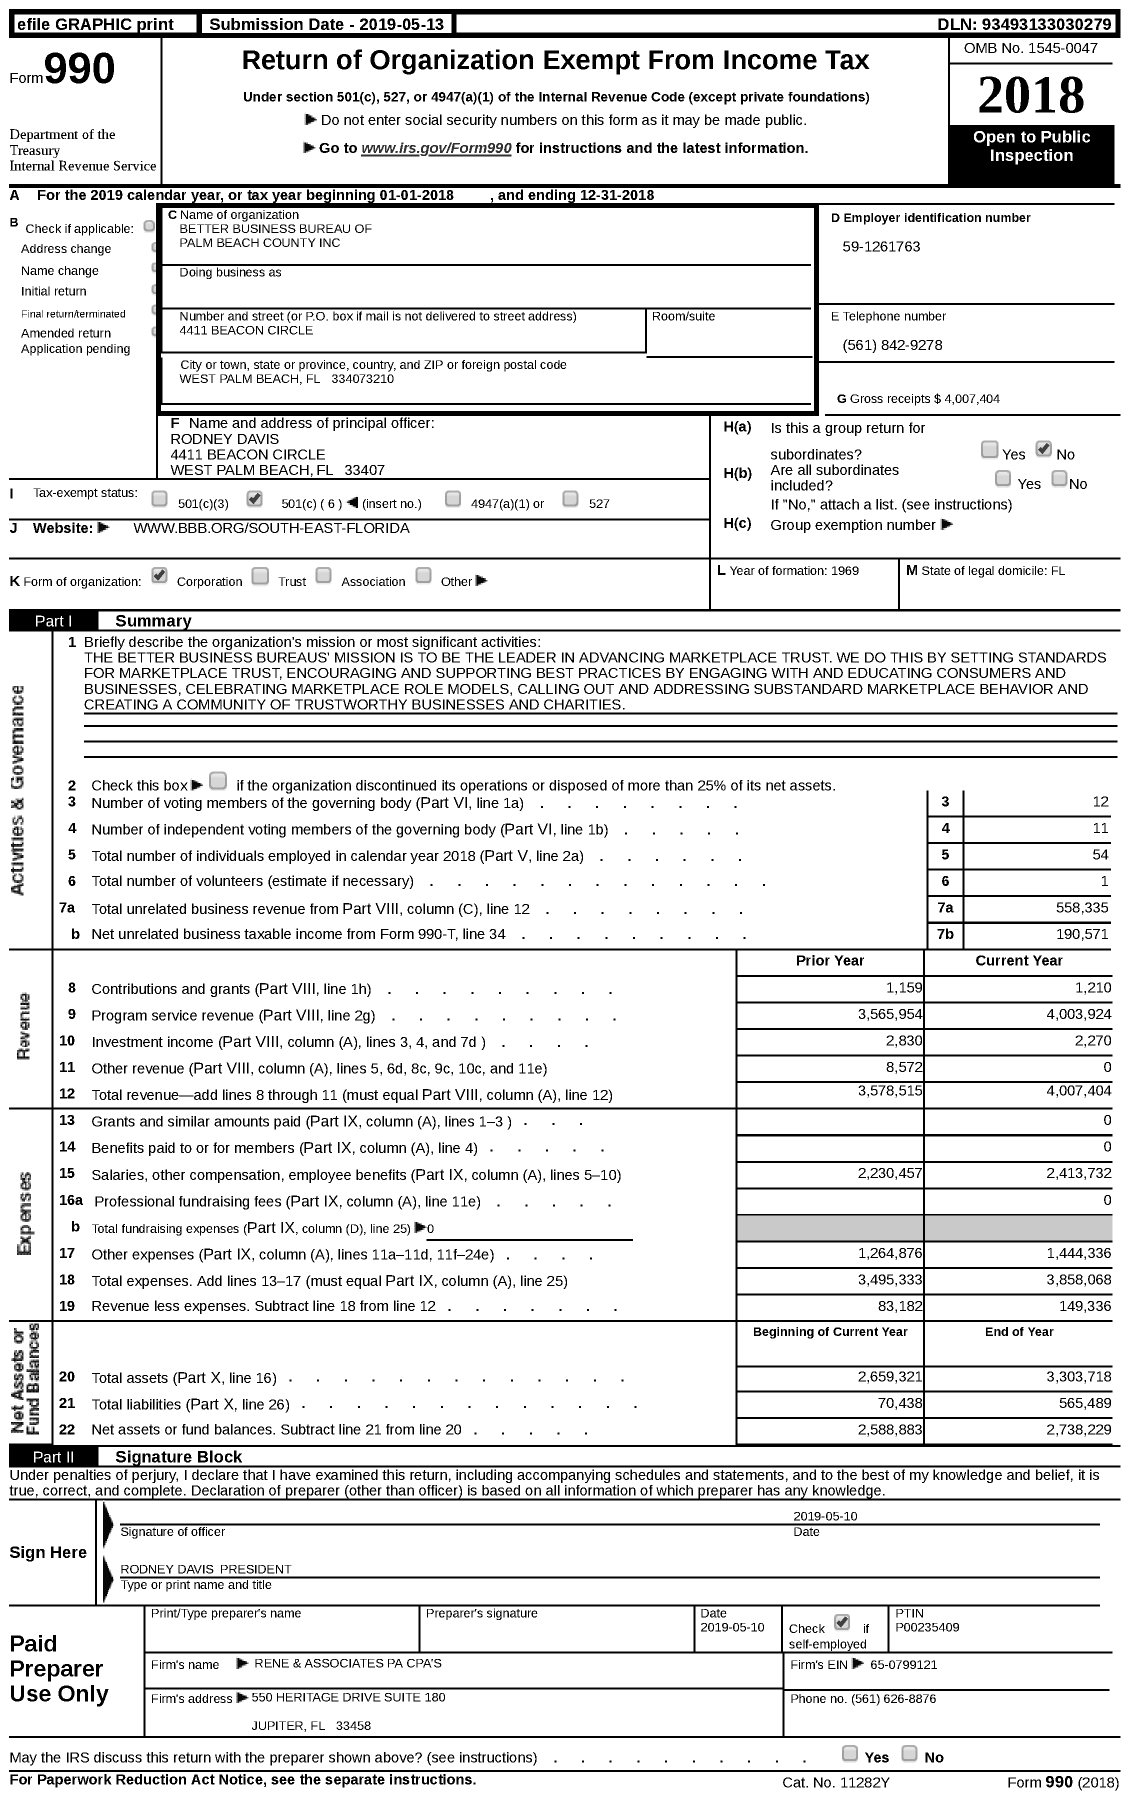 Image of first page of 2018 Form 990 for Better Business Bureau of Palm Beach County (BBB)